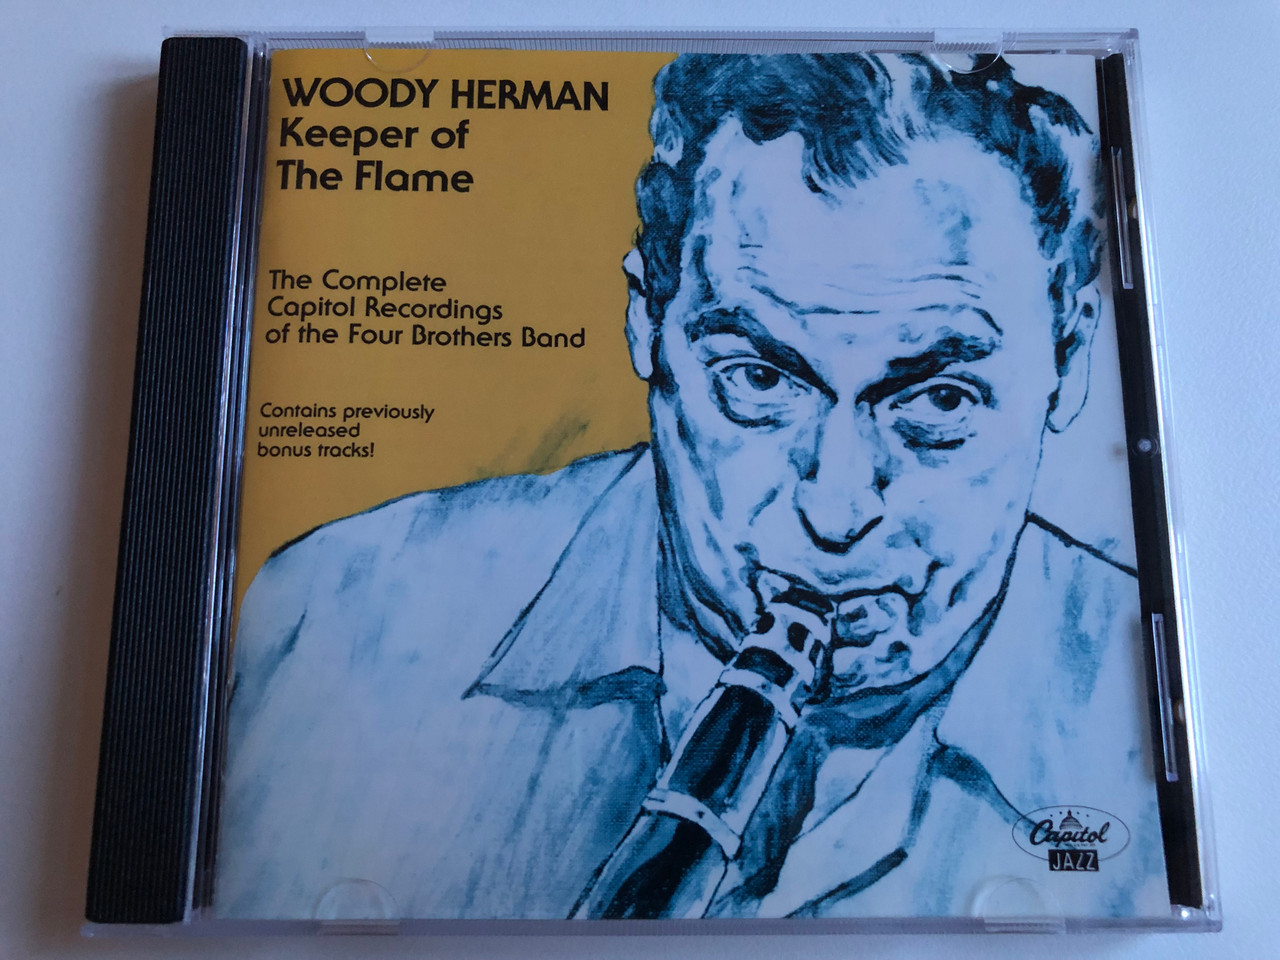 https://cdn10.bigcommerce.com/s-62bdpkt7pb/products/0/images/194881/Woody_Herman_Keeper_Of_The_Flame_The_Complete_Capitol_Recordings_Of_The_Four_Brothers_Band_Contains_previously_unreleased_bonus_tracks_Capitol_Jazz_Audio_CD_1992_CDP_7_98453_2_1__60351.1633688541.1280.1280.JPG?c=2&_gl=1*1vqvo99*_ga*MjA2NTIxMjE2MC4xNTkwNTEyNTMy*_ga_WS2VZYPC6G*MTYzMzY3NDQ0My4xMjAuMS4xNjMzNjg4Mzc2LjUx